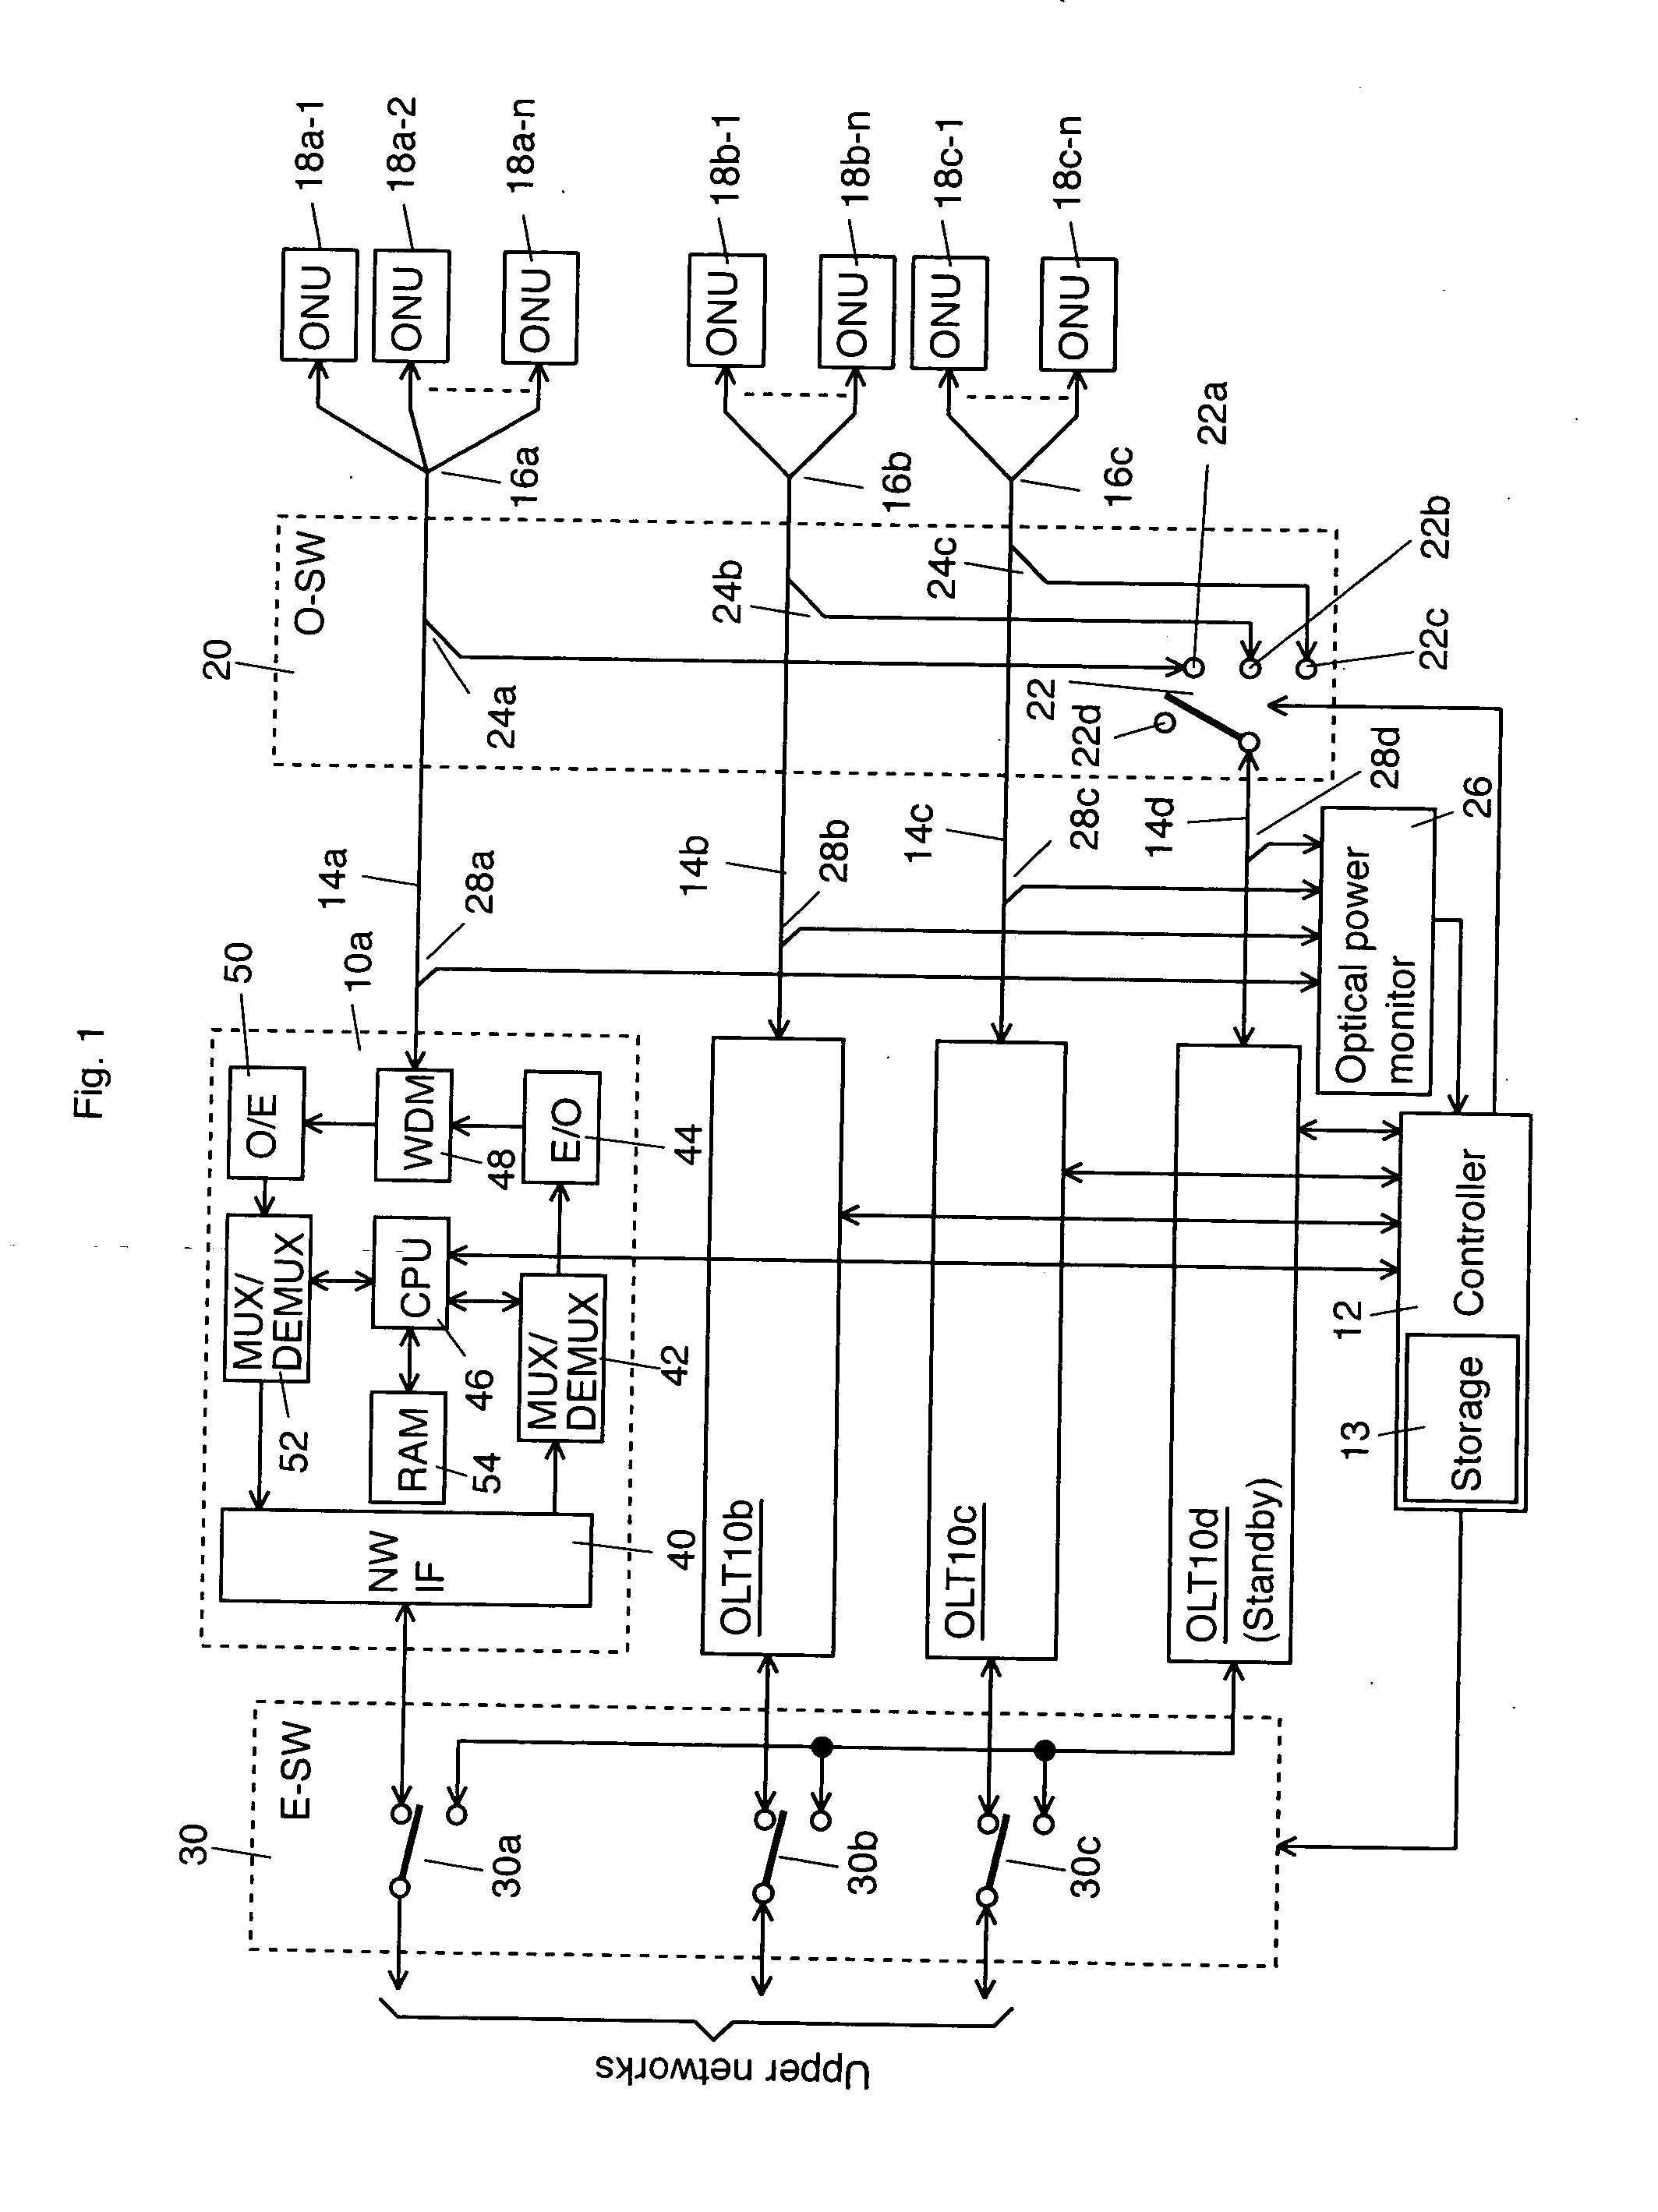 Optical termination system